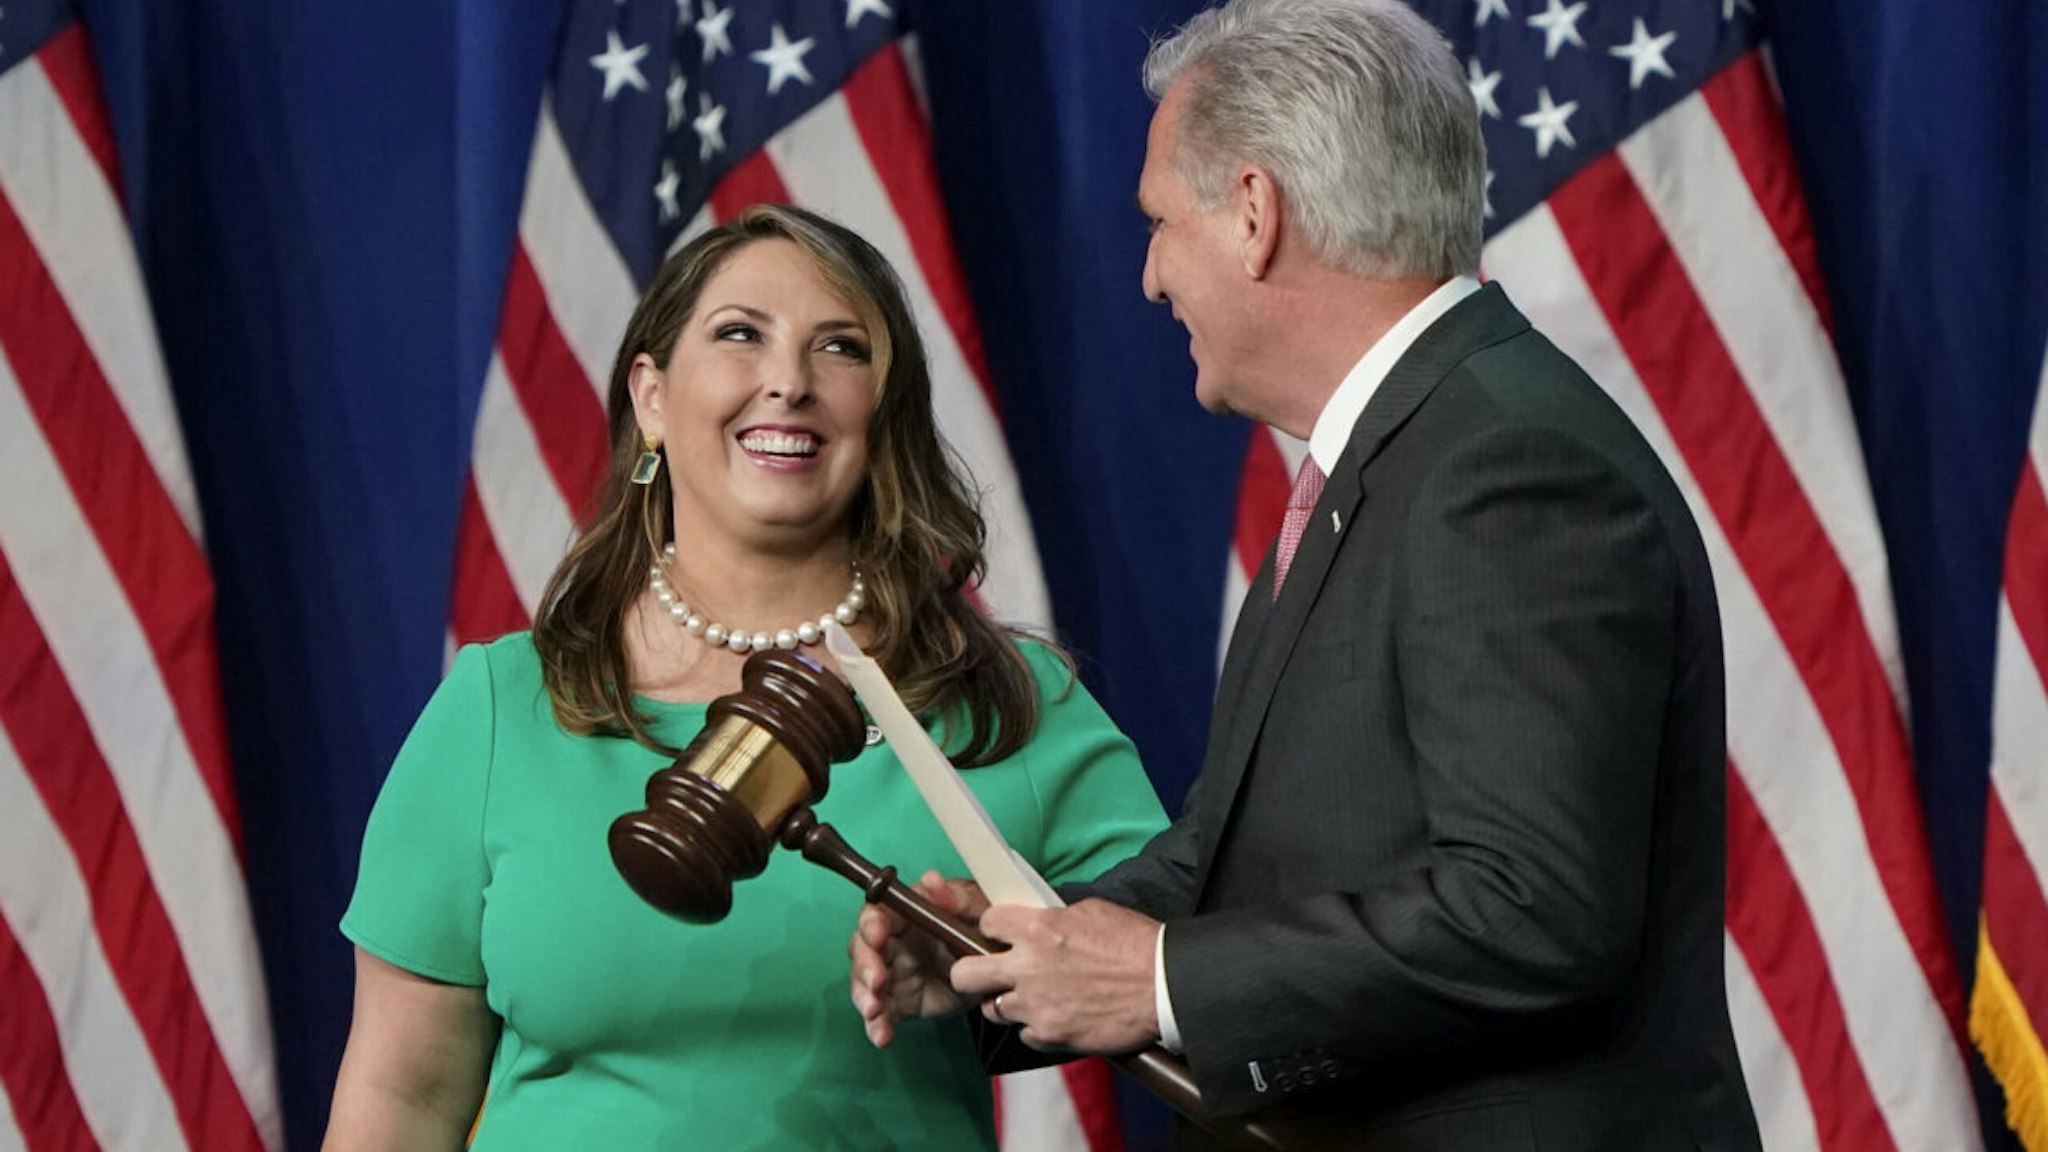 Republican National Committee Chairwoman, Ronna McDaniel, hands the gavel to House Minority Leader Kevin McCarthy of California, before he speaks at the opening of the first day of the Republican National Convention, meeting in the Richardson Ballroom, Charlotte Convention Center on August 24, 2020, in Charlotte, North Carolina, for the roll call vote to renominate Donald Trump to be President of the United States and Mike Pence to be Vice President.